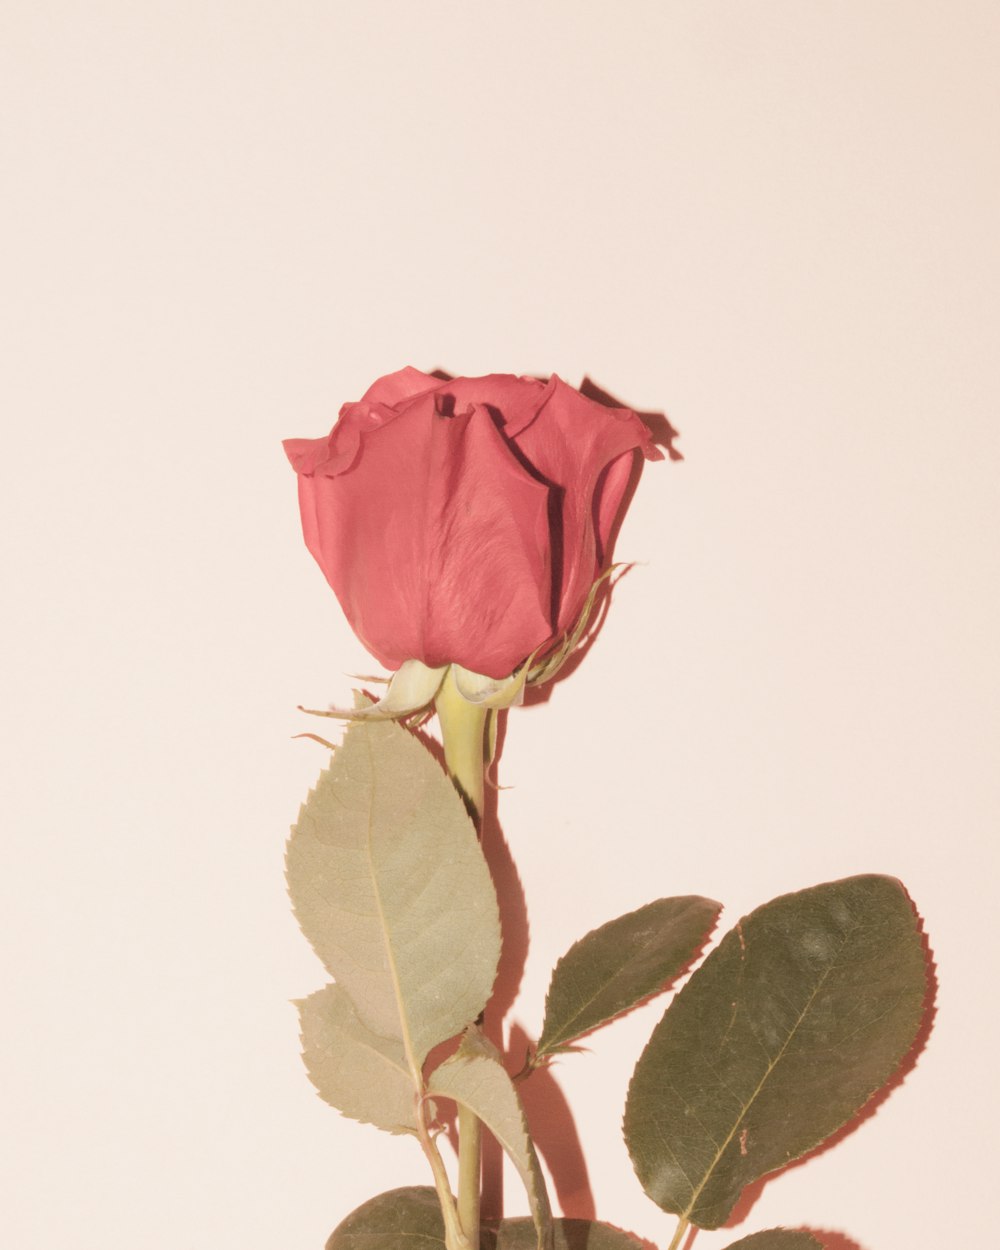 Dusty Rose Pictures  Download Free Images on Unsplash